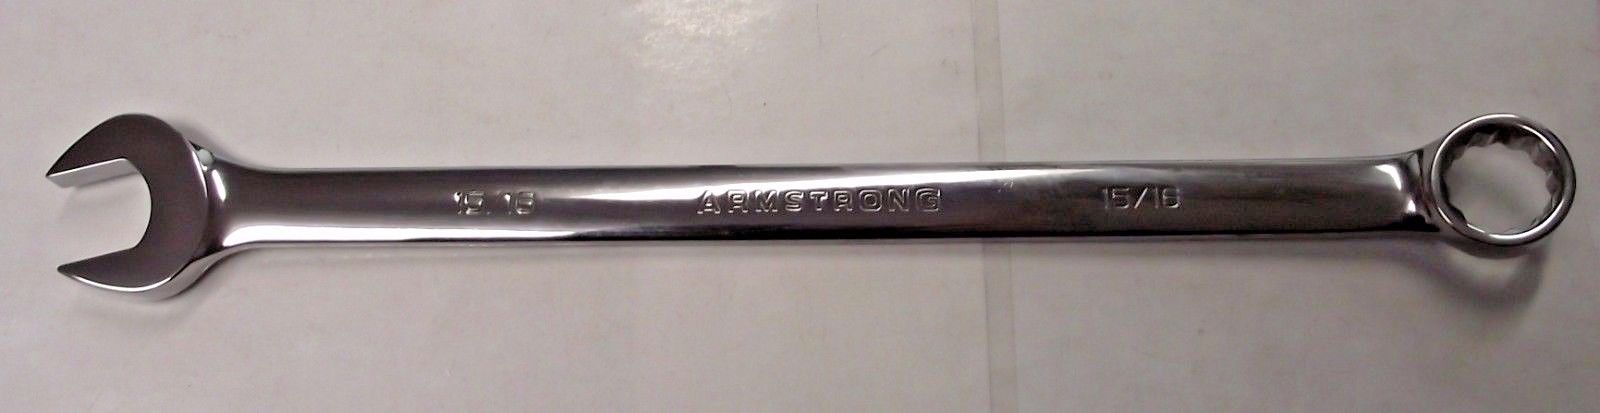 Armstrong 25-430 15/16" Full Polish Extra Long Combination Wrench 12 Point USA